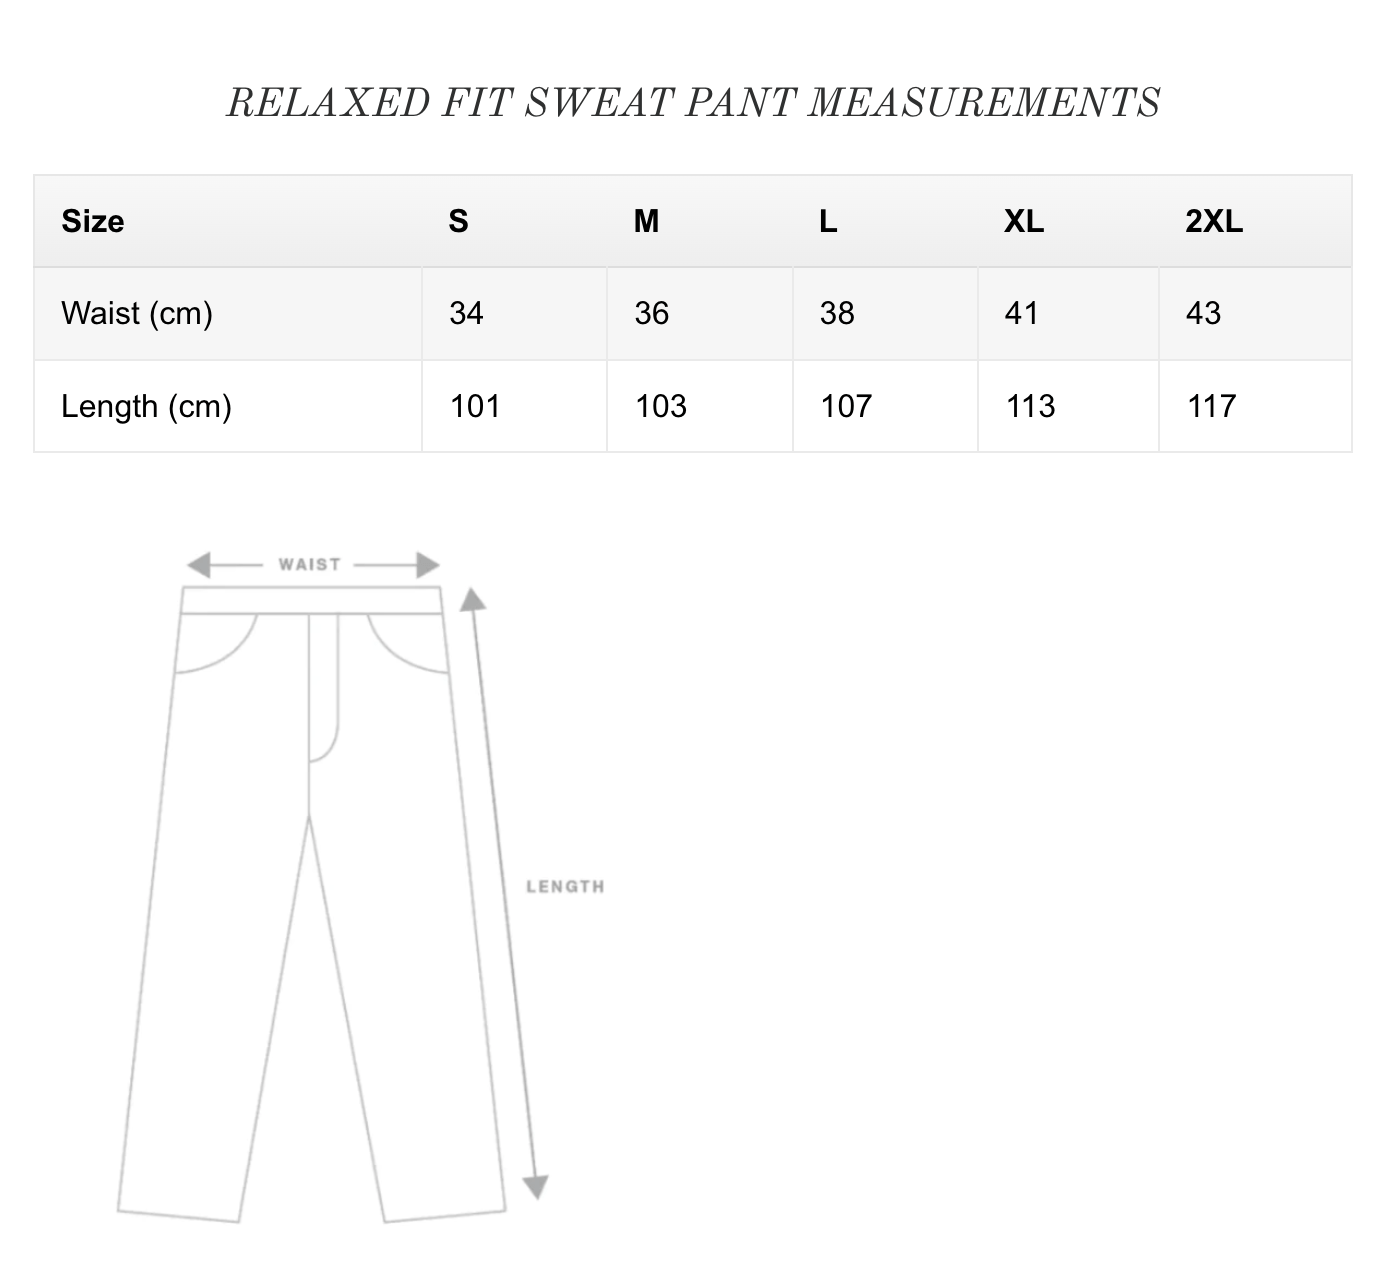 WING HEAVYWEIGHT TRACK PANT - CYPRESS